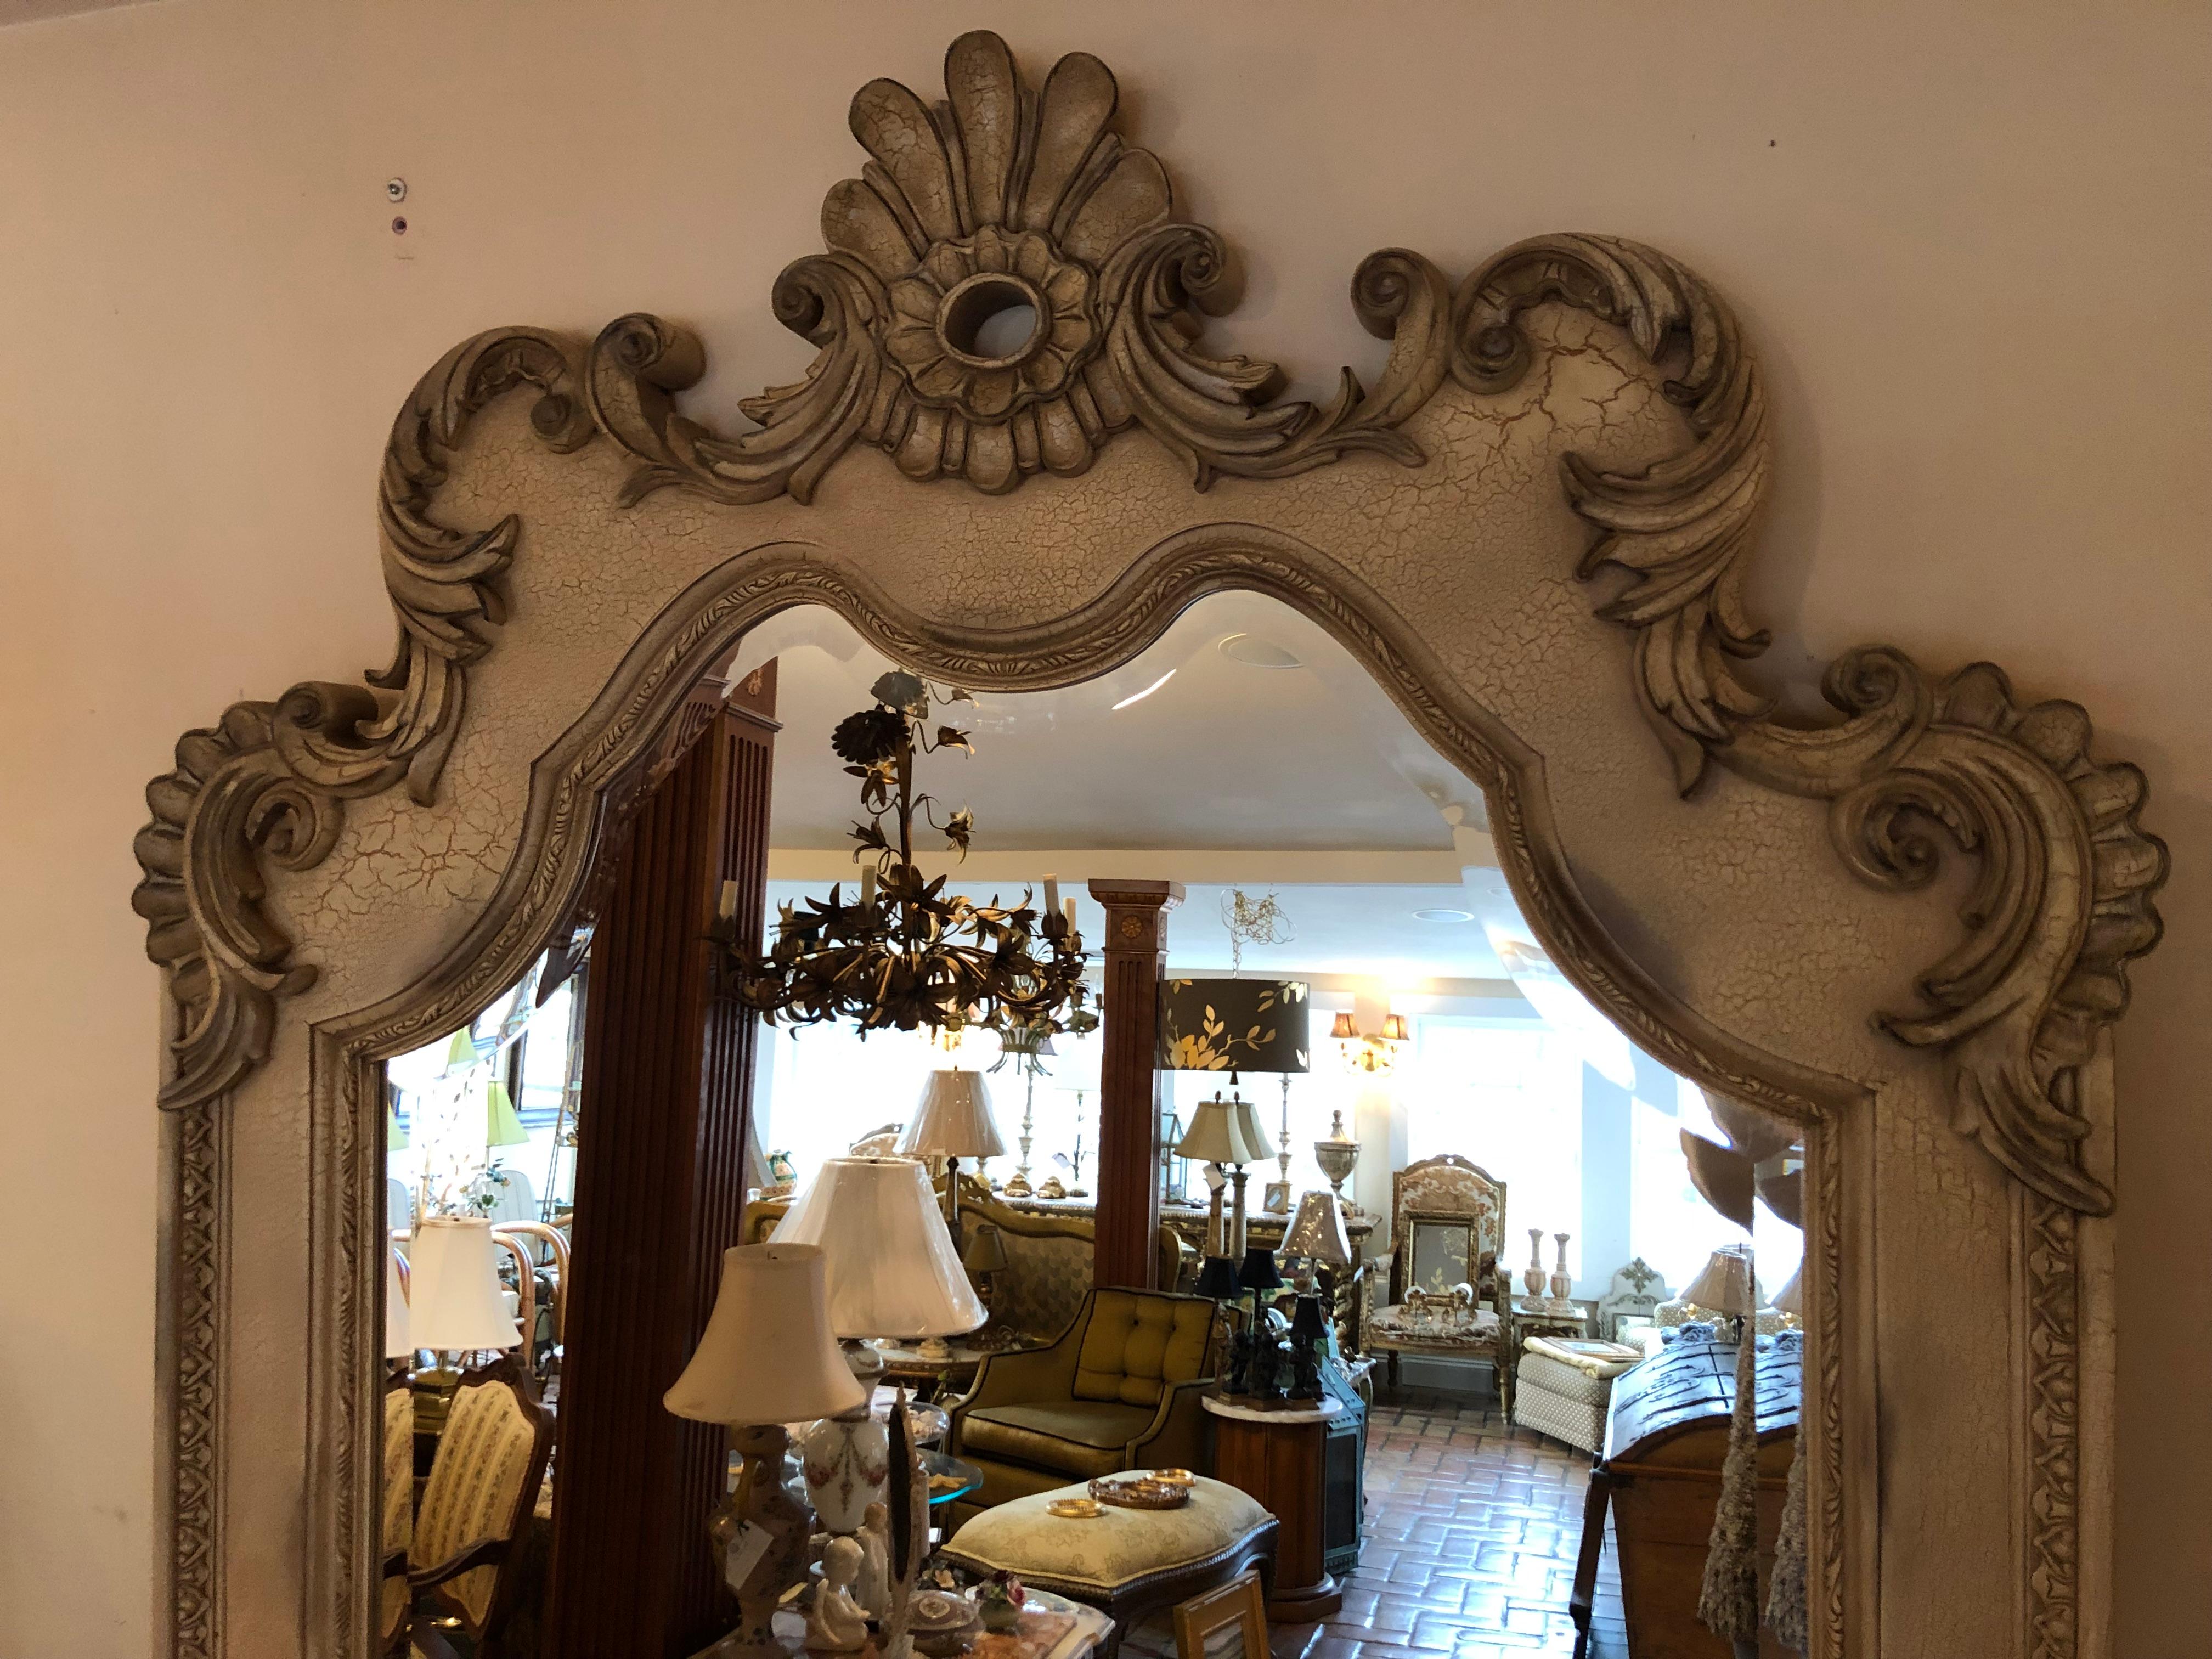 8 ft. Tall Hollywood Regency Style Leaning or Wall Mount Mirror 2